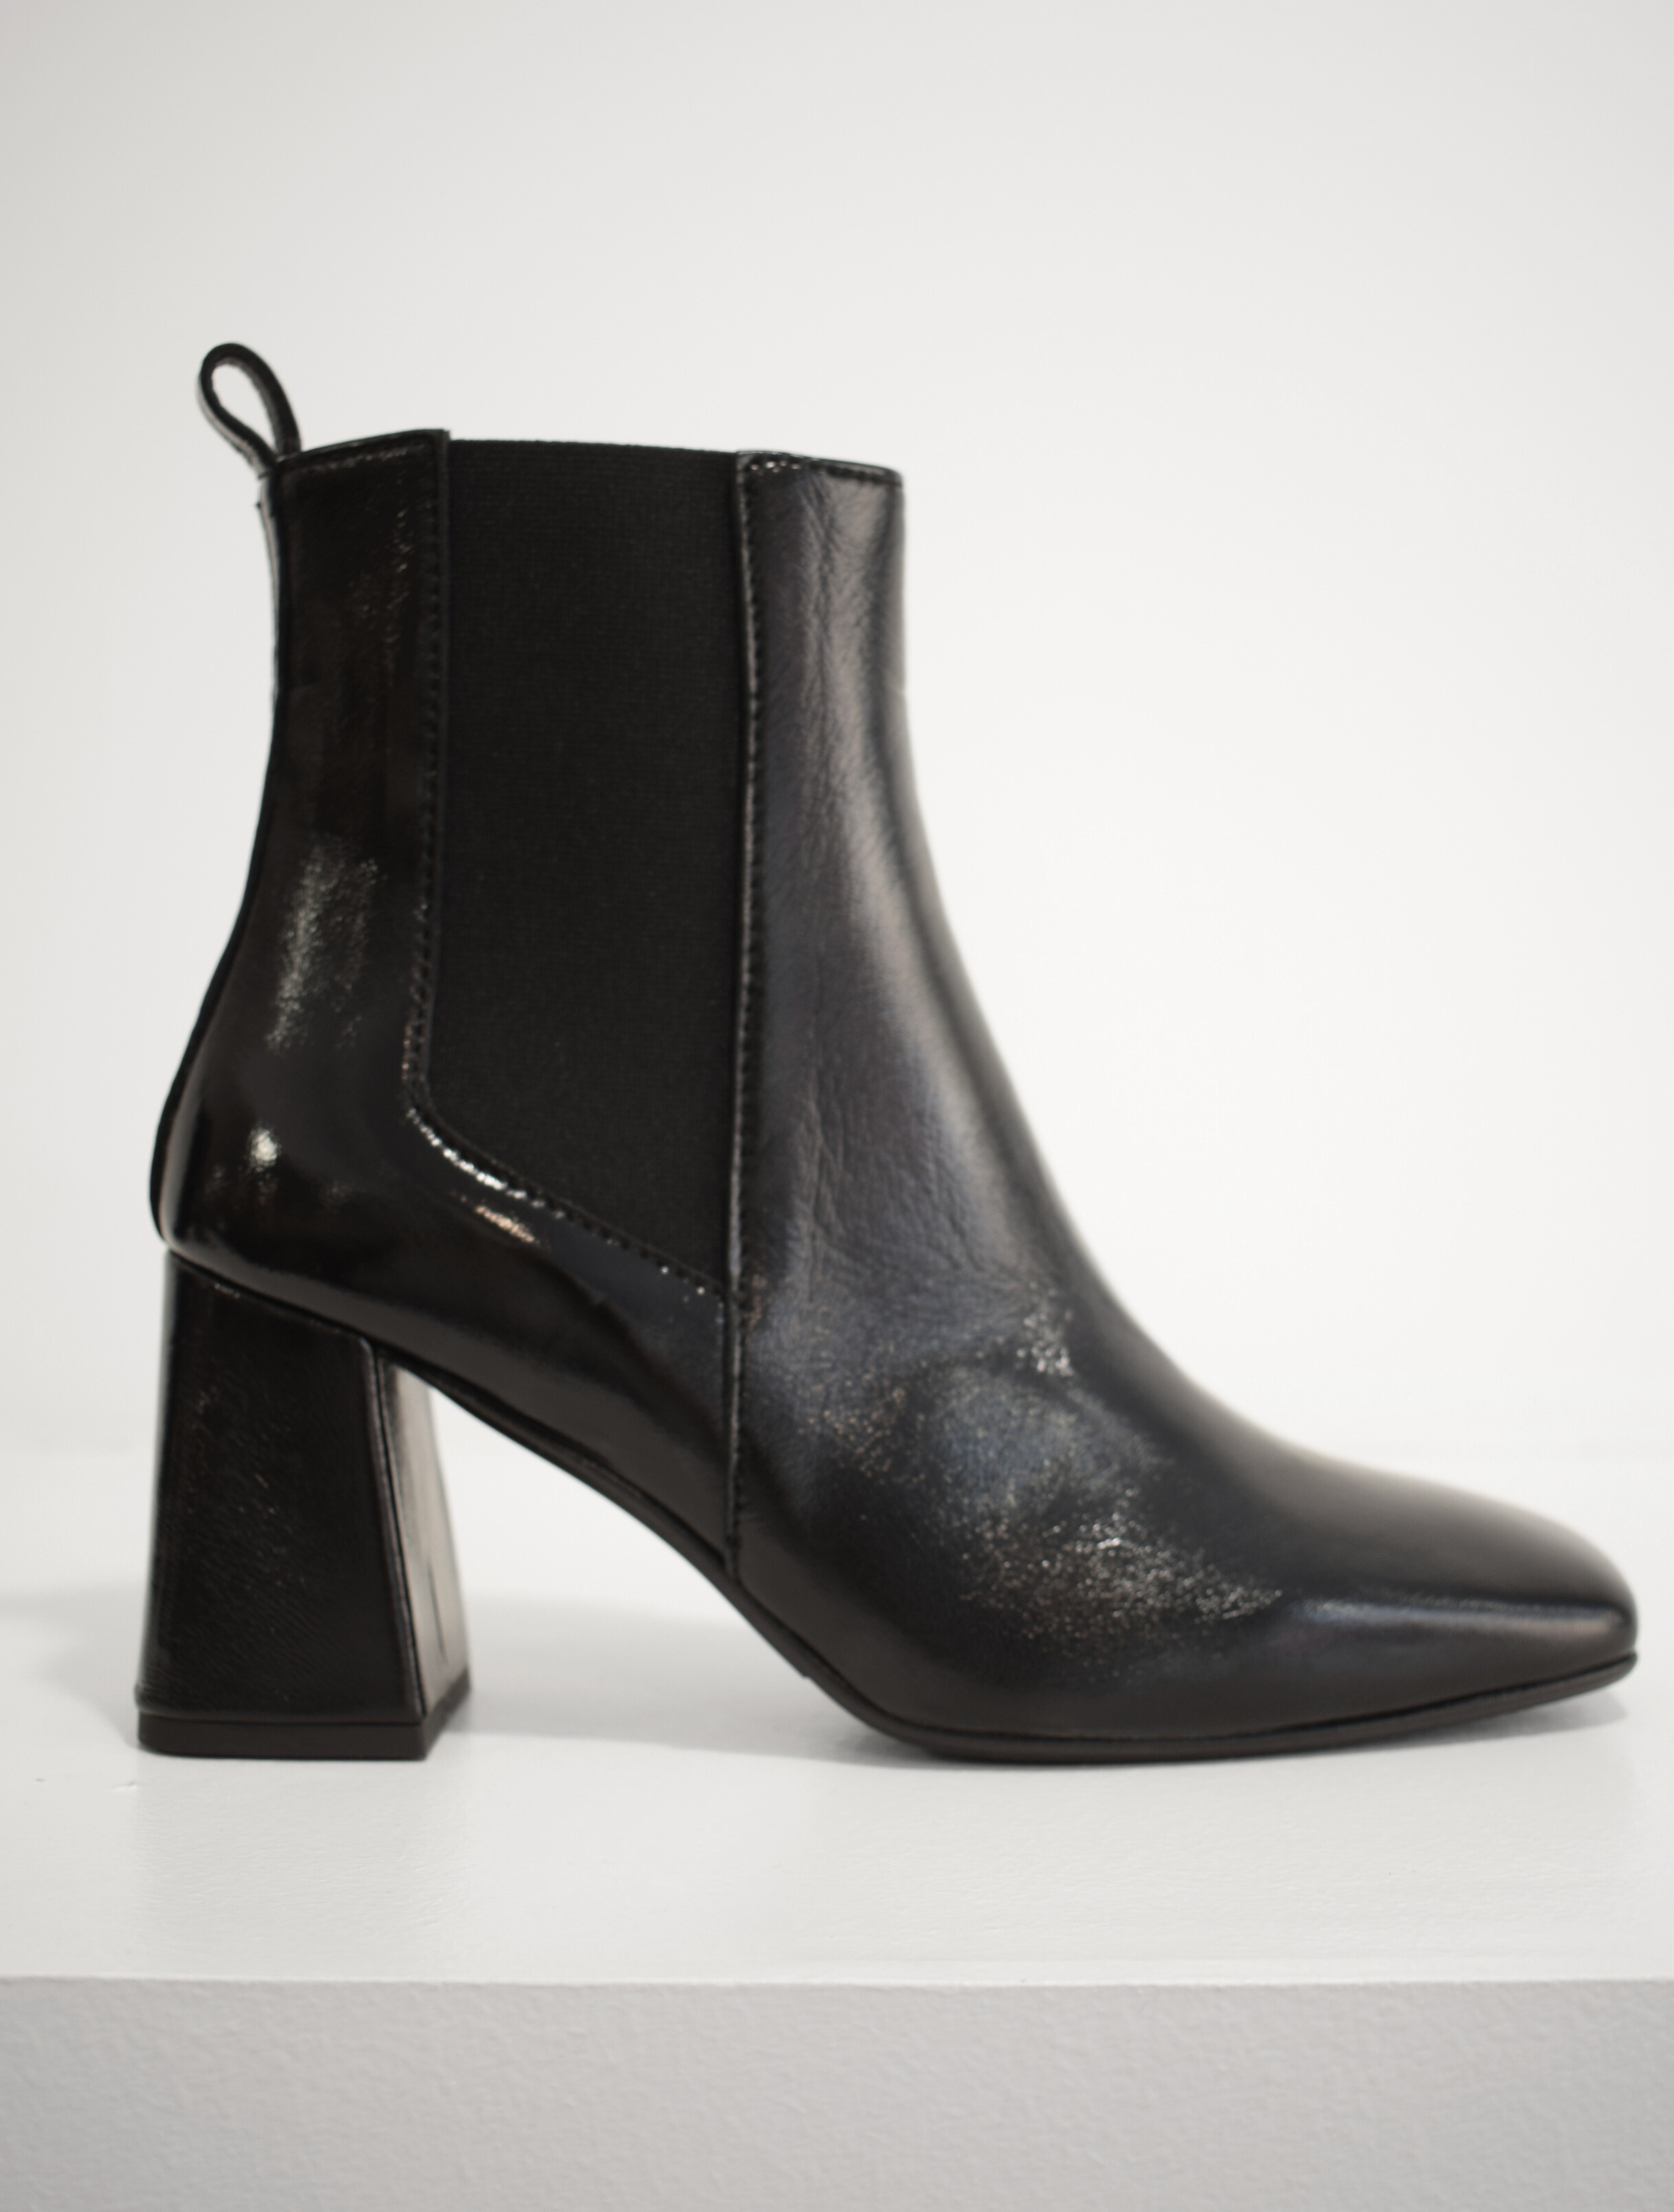 Pull on black patent boot with a block heel